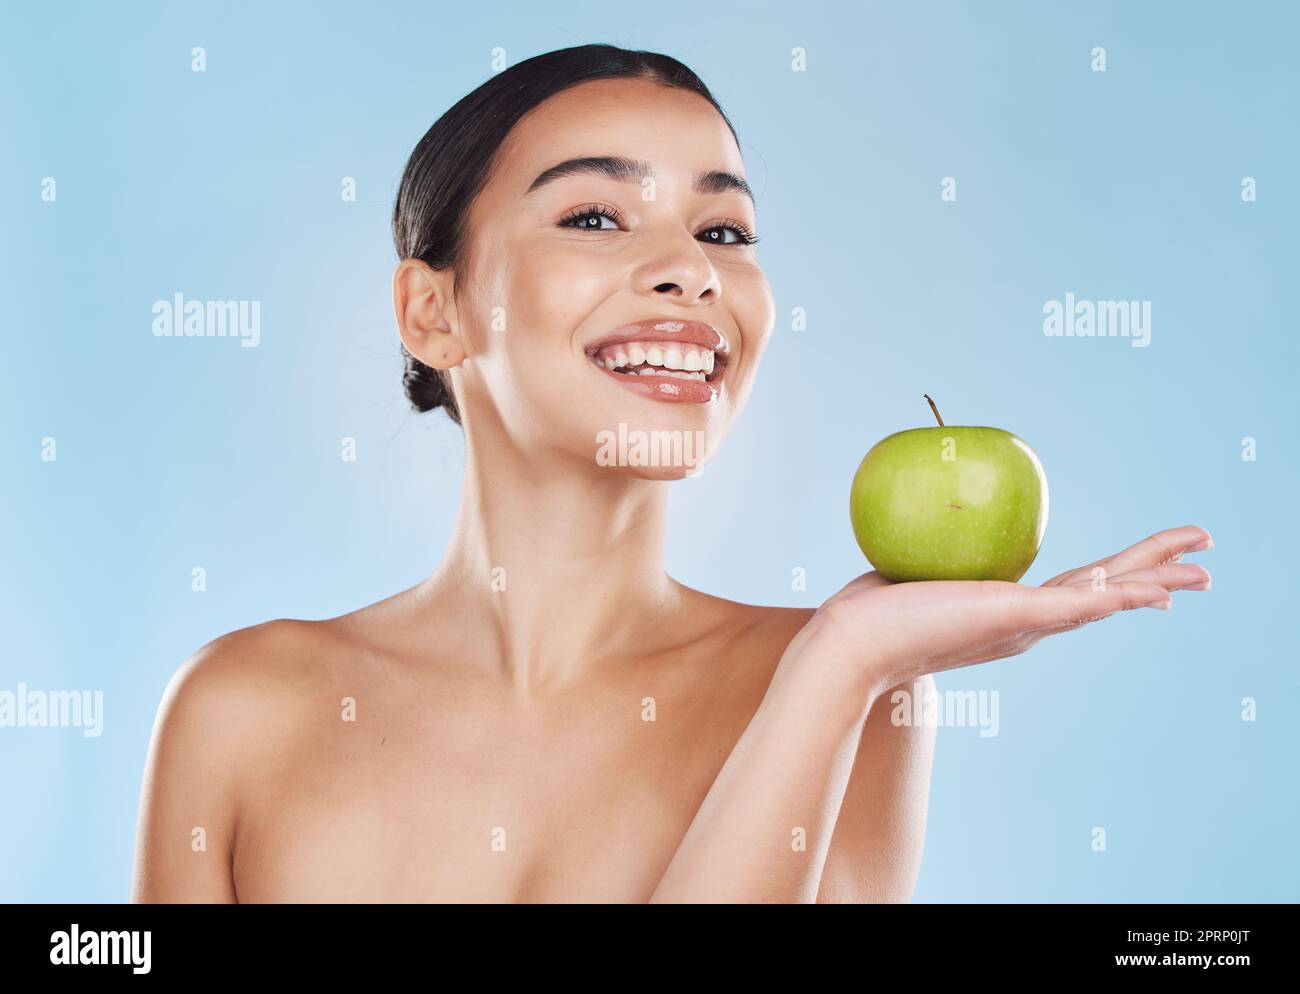 Health, food and apple diet with happy woman holding fruit against blue background. Portrait of a young female excited by weight loss and nutrition, showing benefits of healthy, balance lifestyle Stock Photo